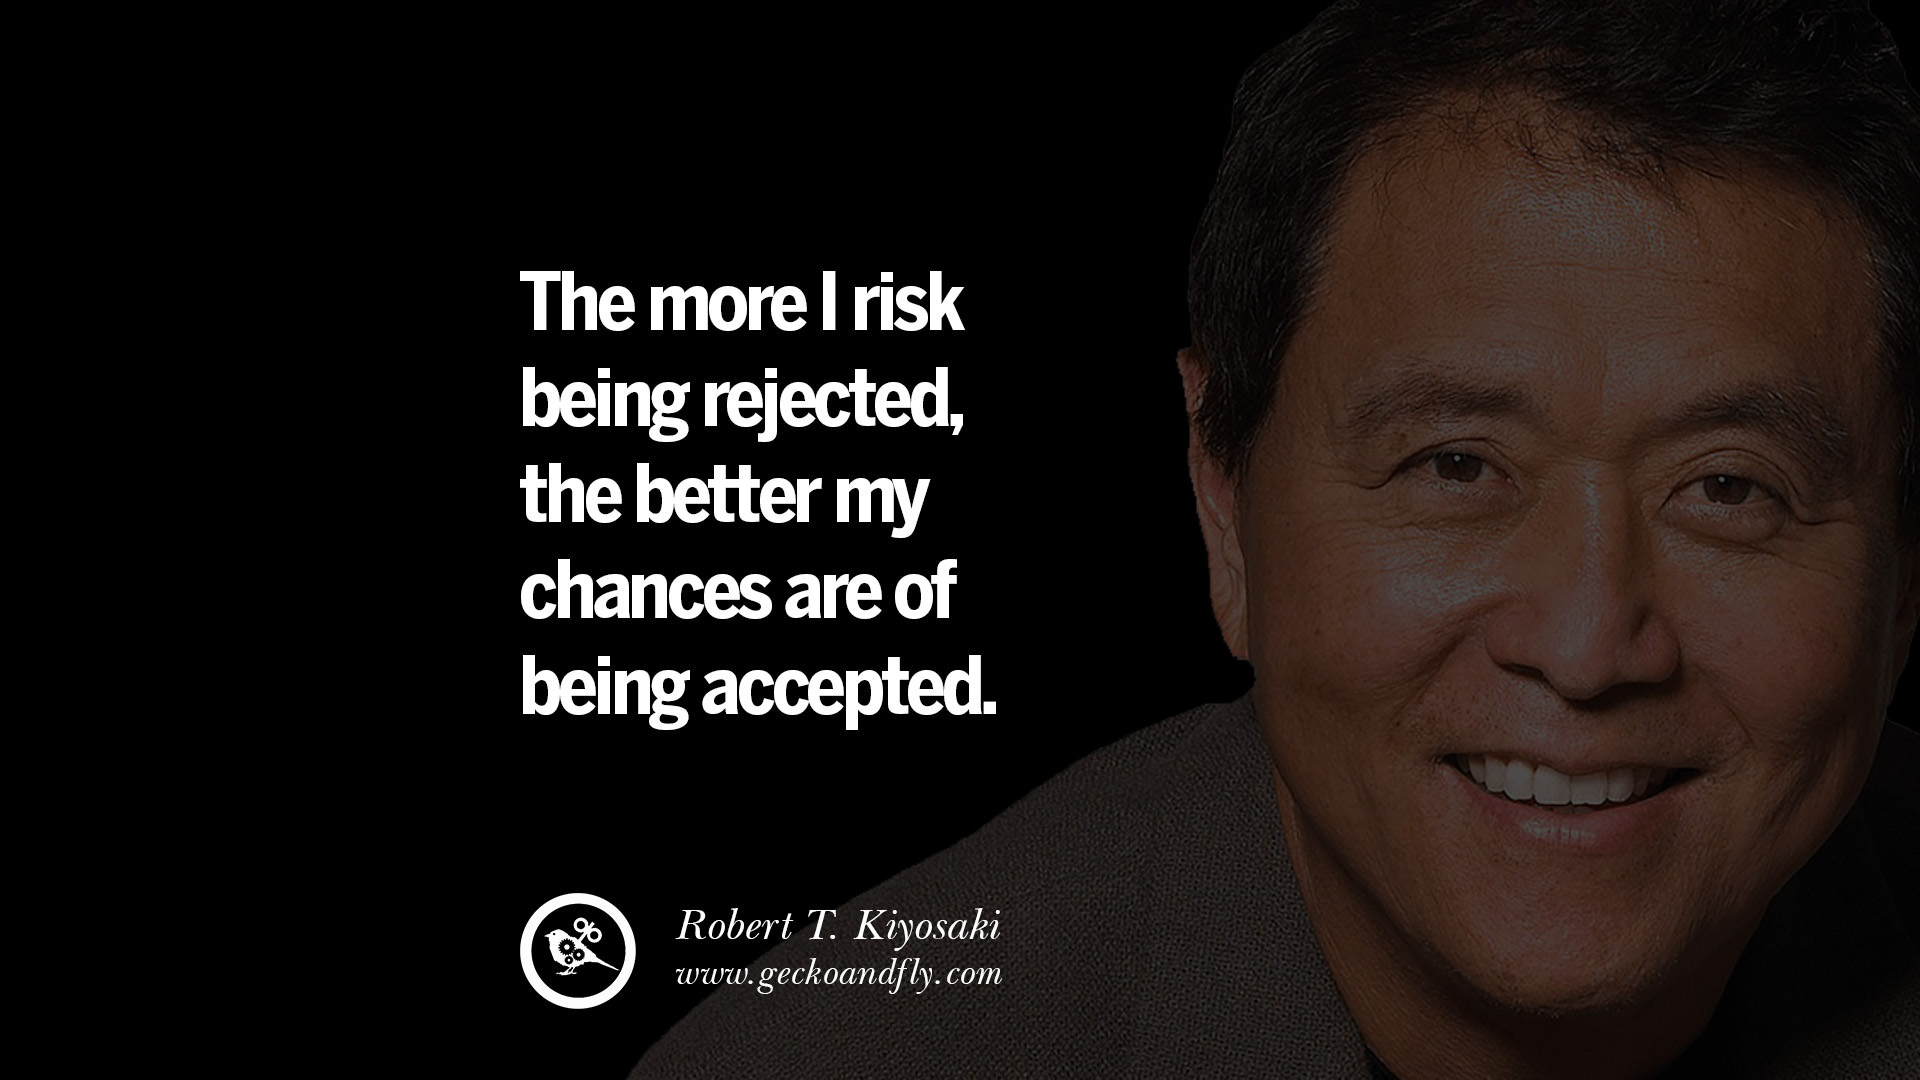 The more I risk being rejected the better my chances are of being accepted